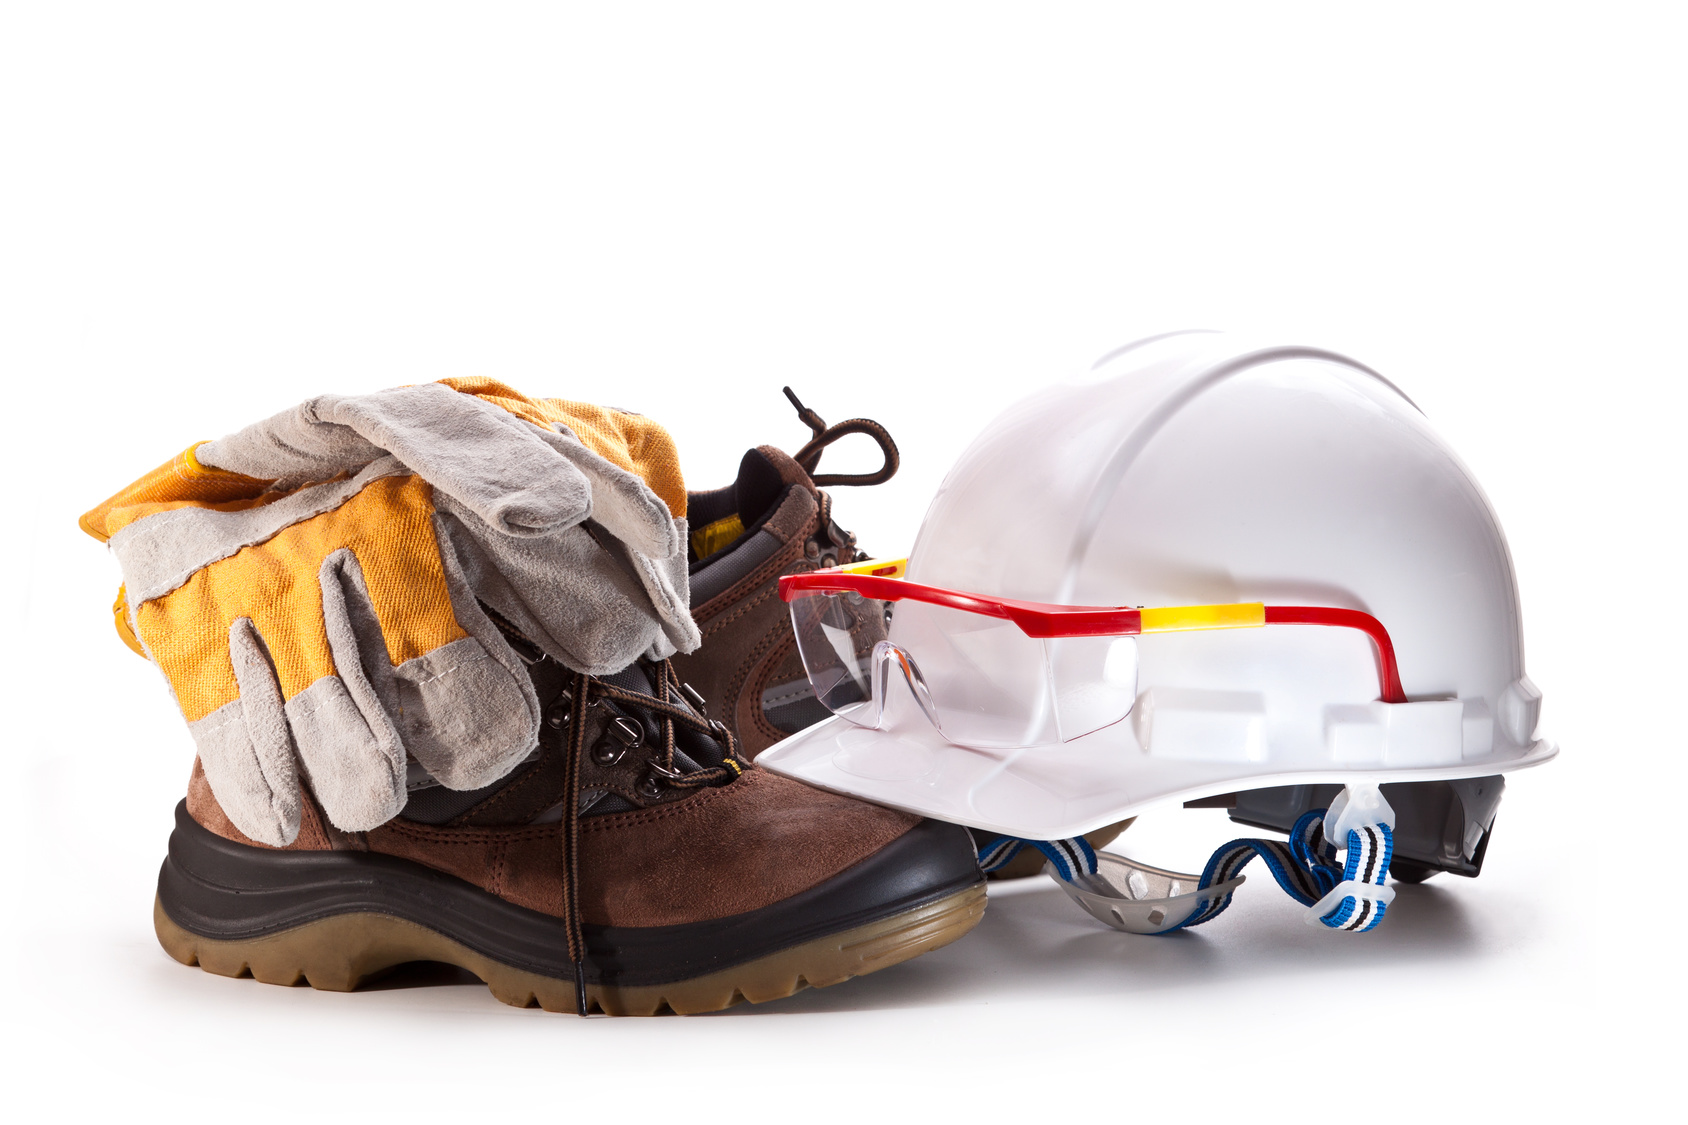 White hard hat with goggles, boots, and gloves on a white background